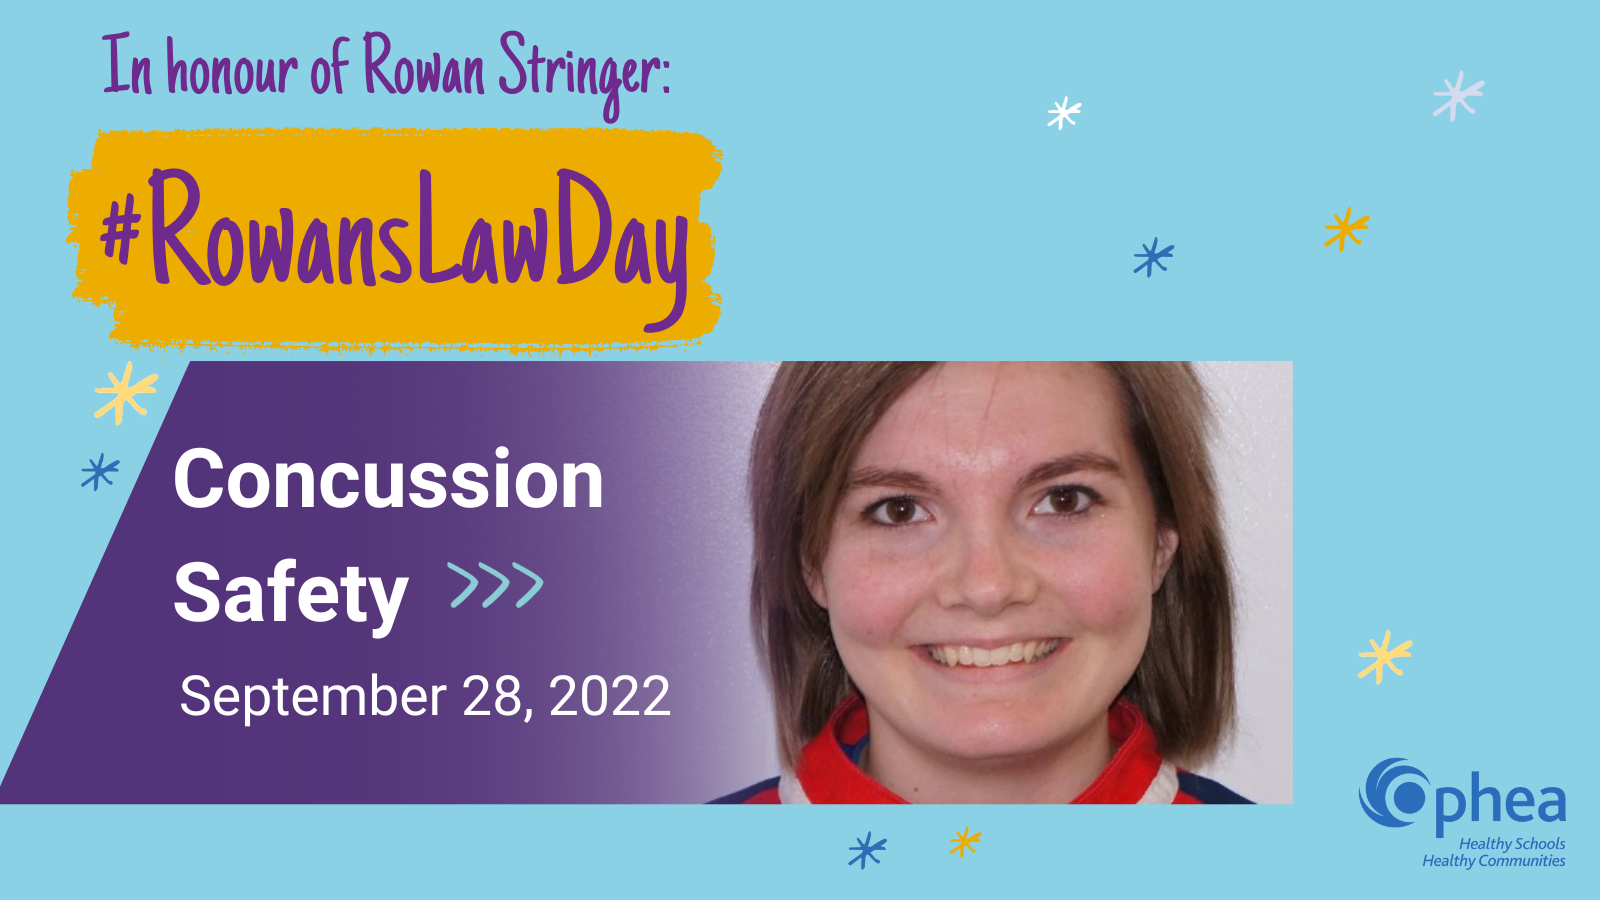 In honour of Rowan Stringer: Rowan's Law Day - Concussion Safety on September 28, 2022. Beside the text there is a photo of Rowan Stringer.